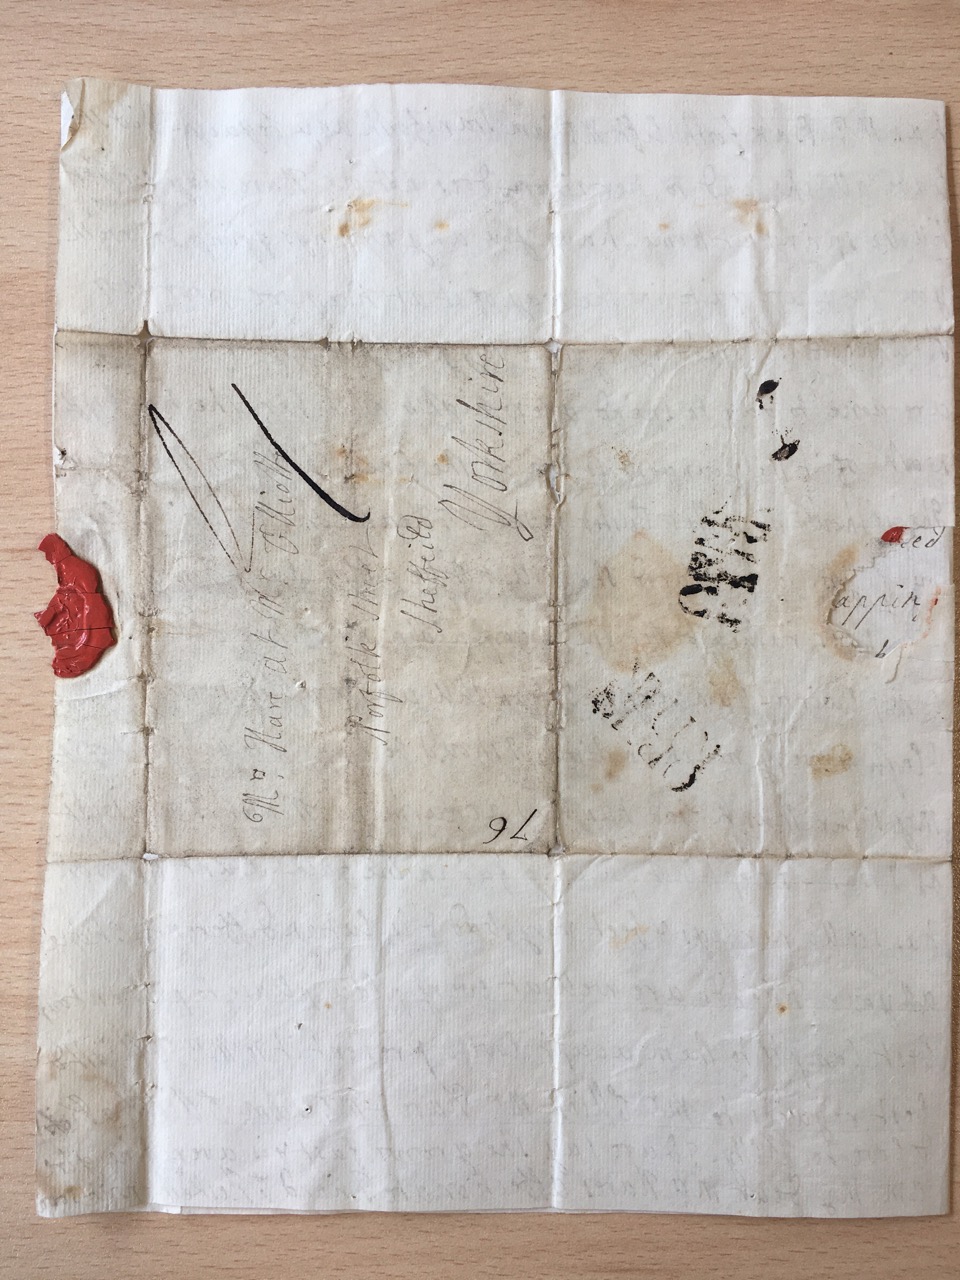 Image #4 of letter: Ellin Hesketh to Ann Hare, 16 March 1776